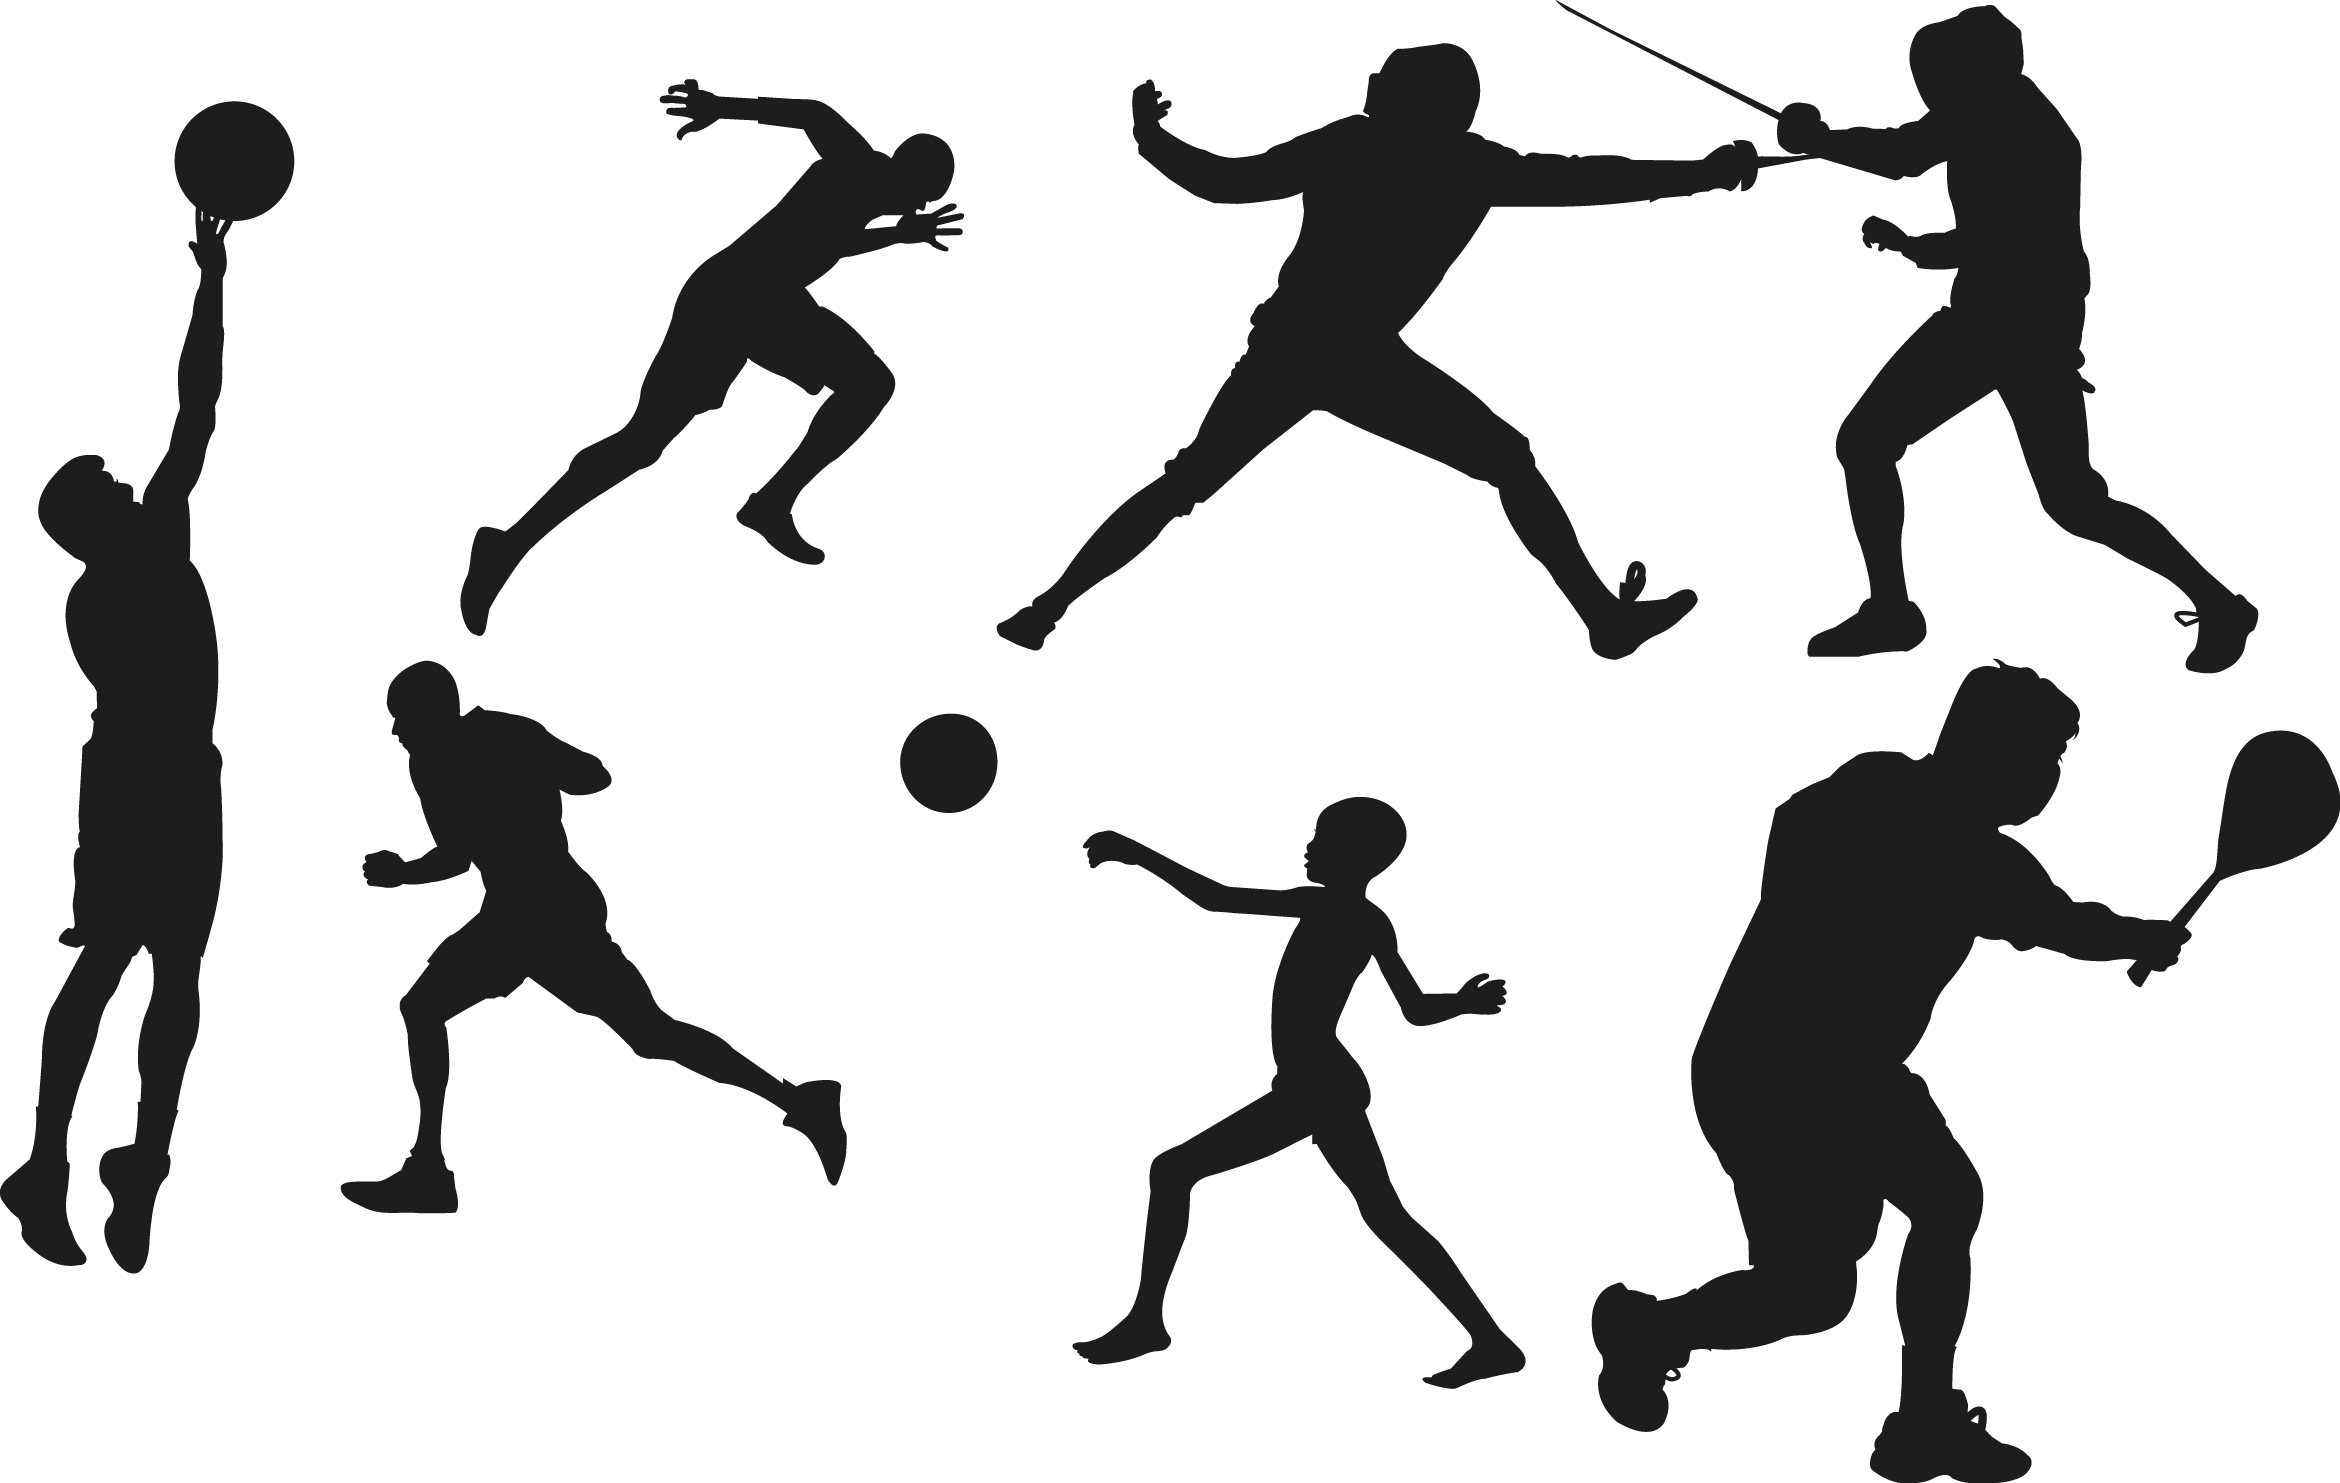 Sport silhouettes